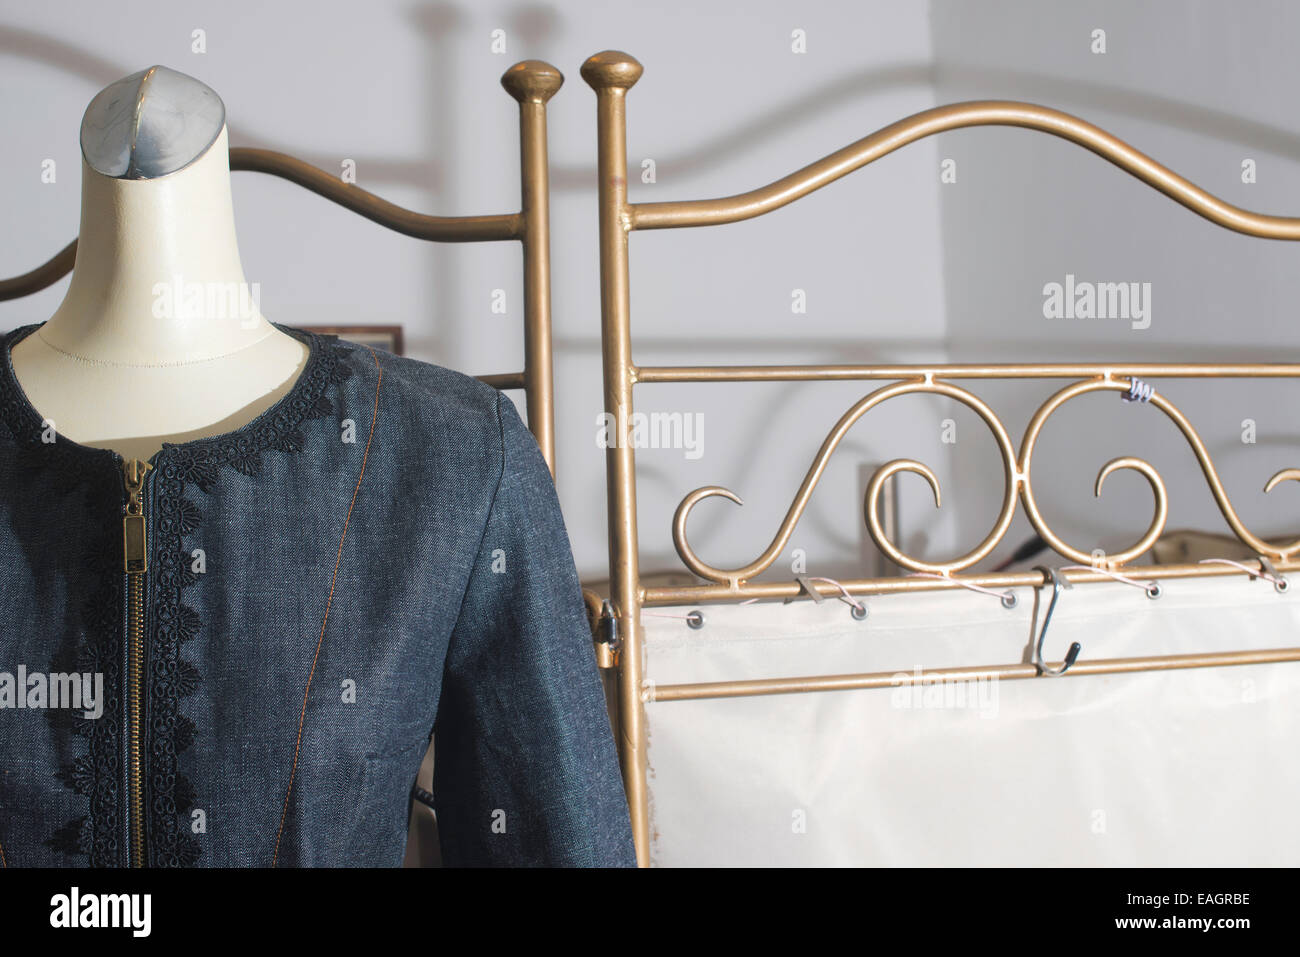 Mannequin with clothing. Vintage style Stock Photo